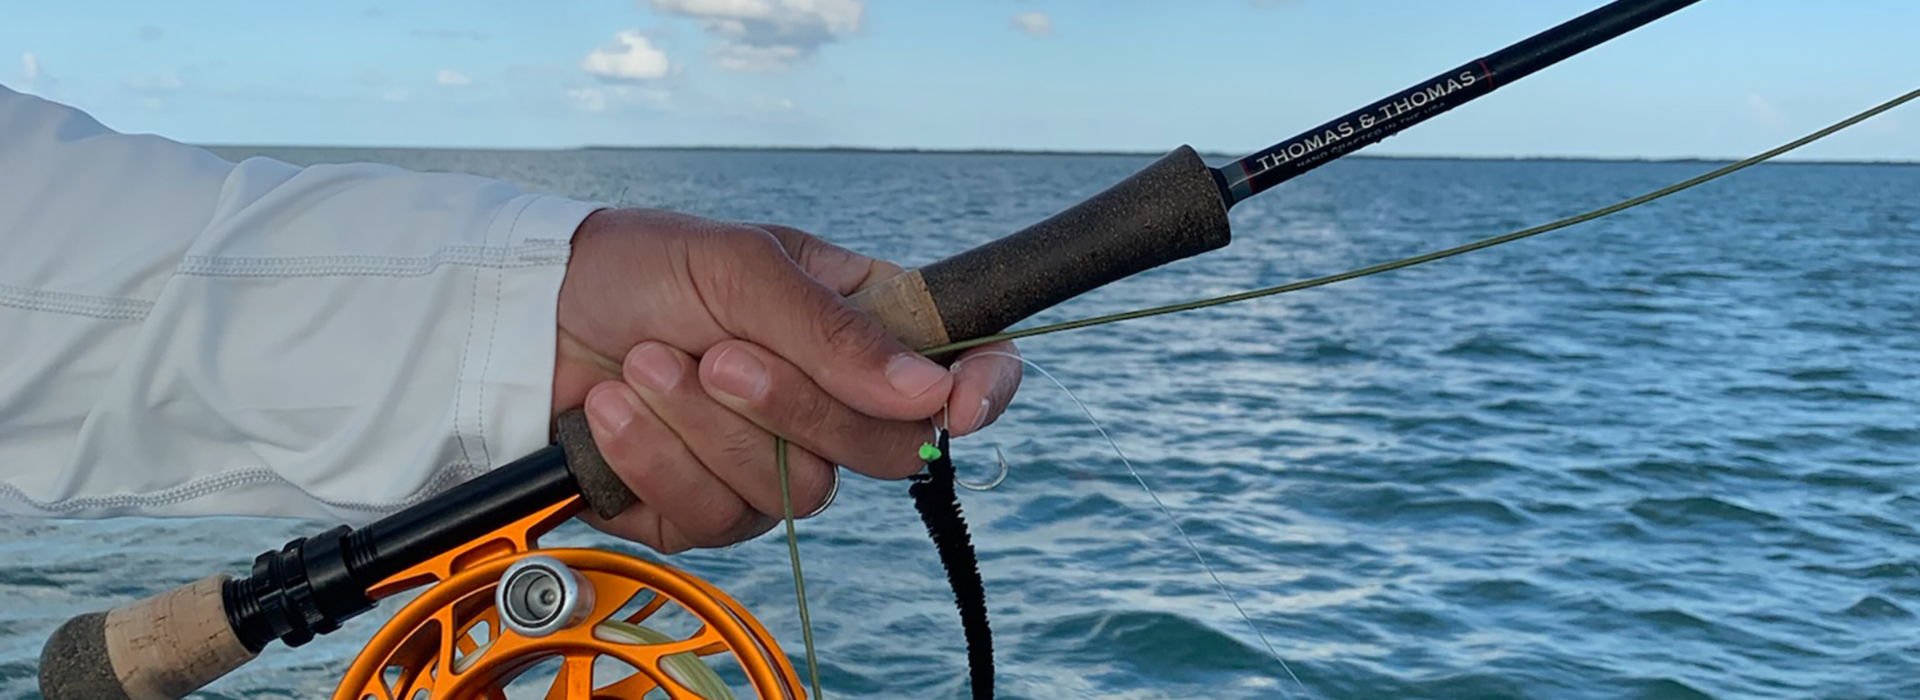 Fly Fishing Equipment - Sting Rea Charters